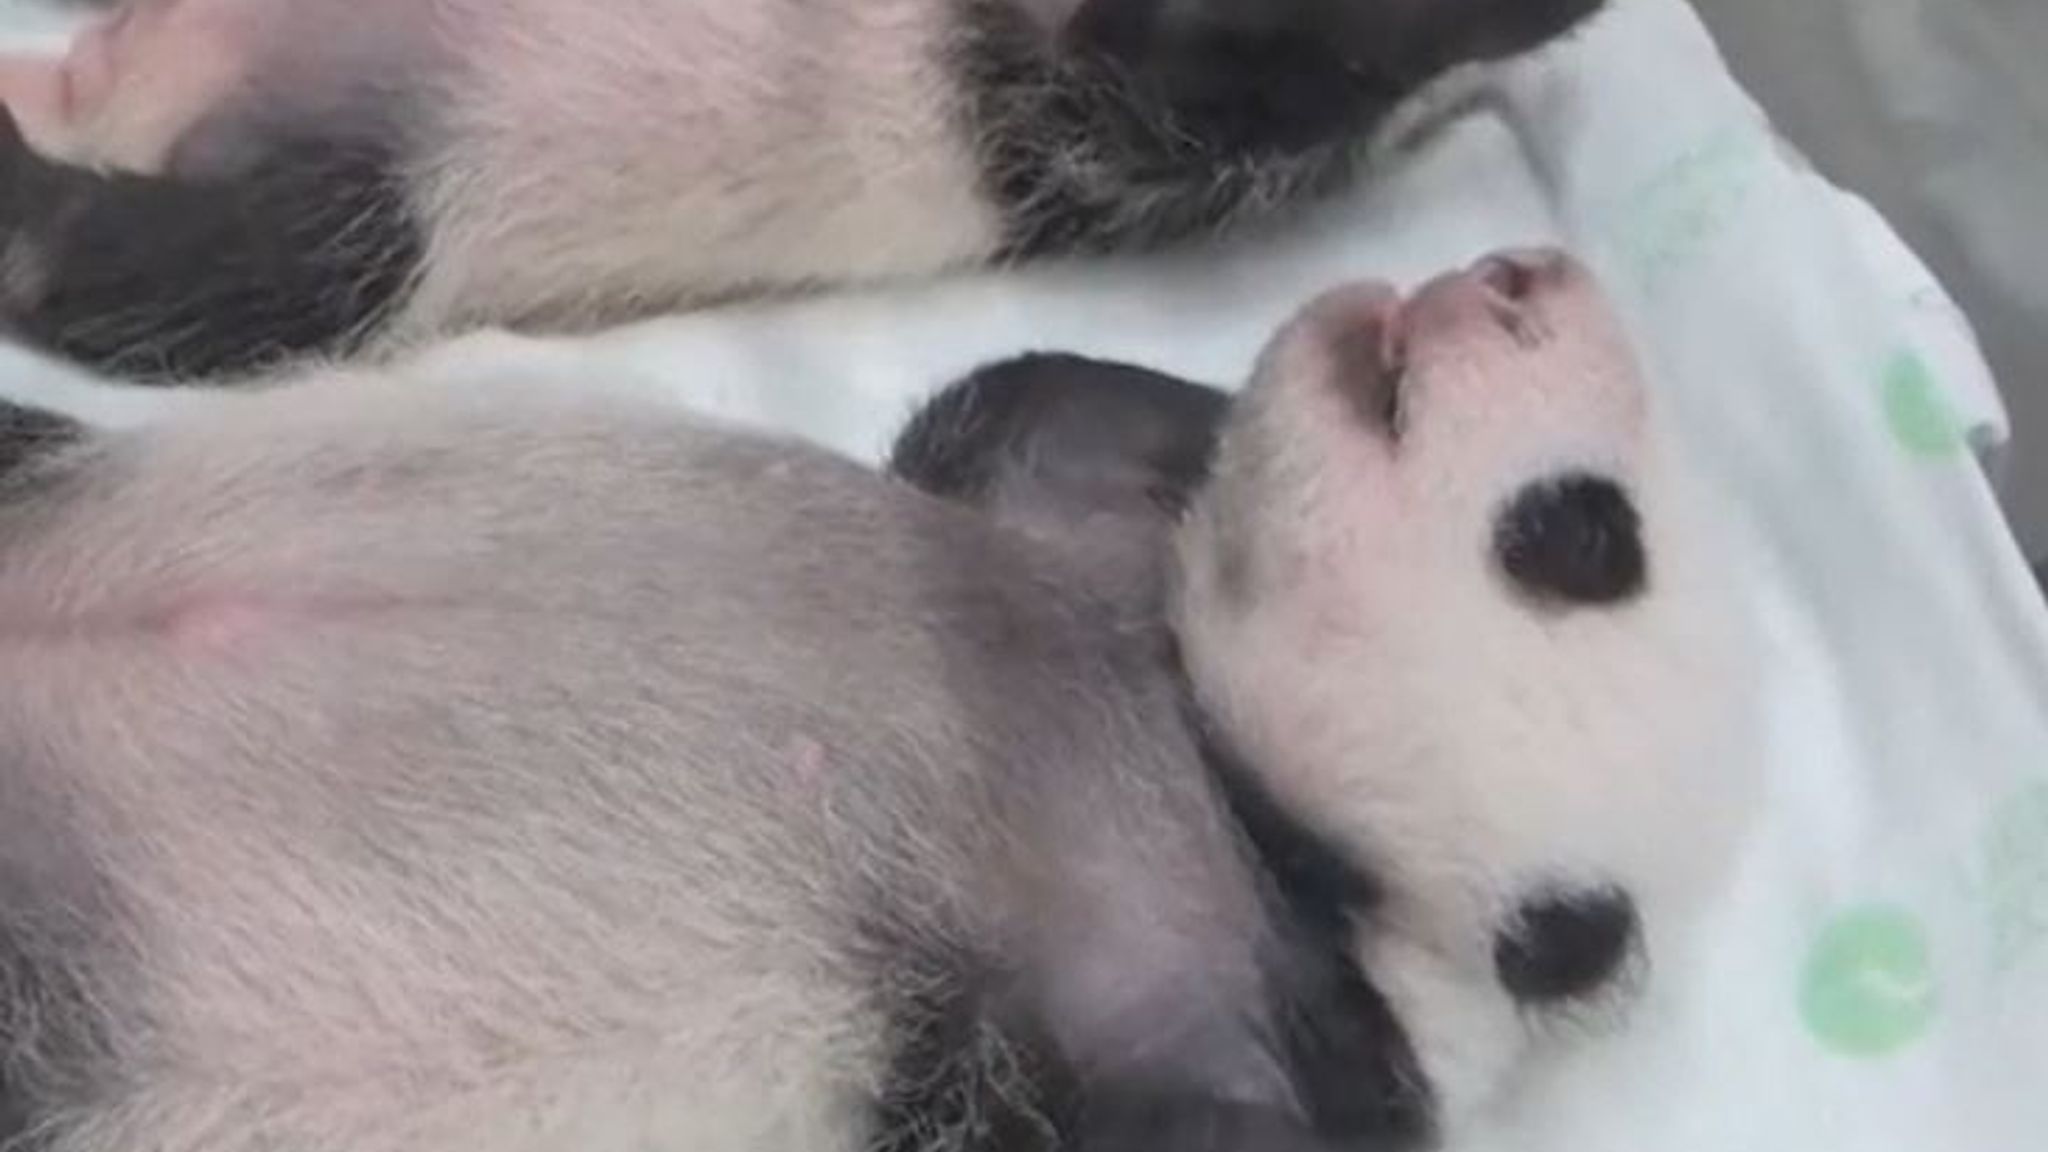 Baby twin giant pandas are weighed in Tokyo